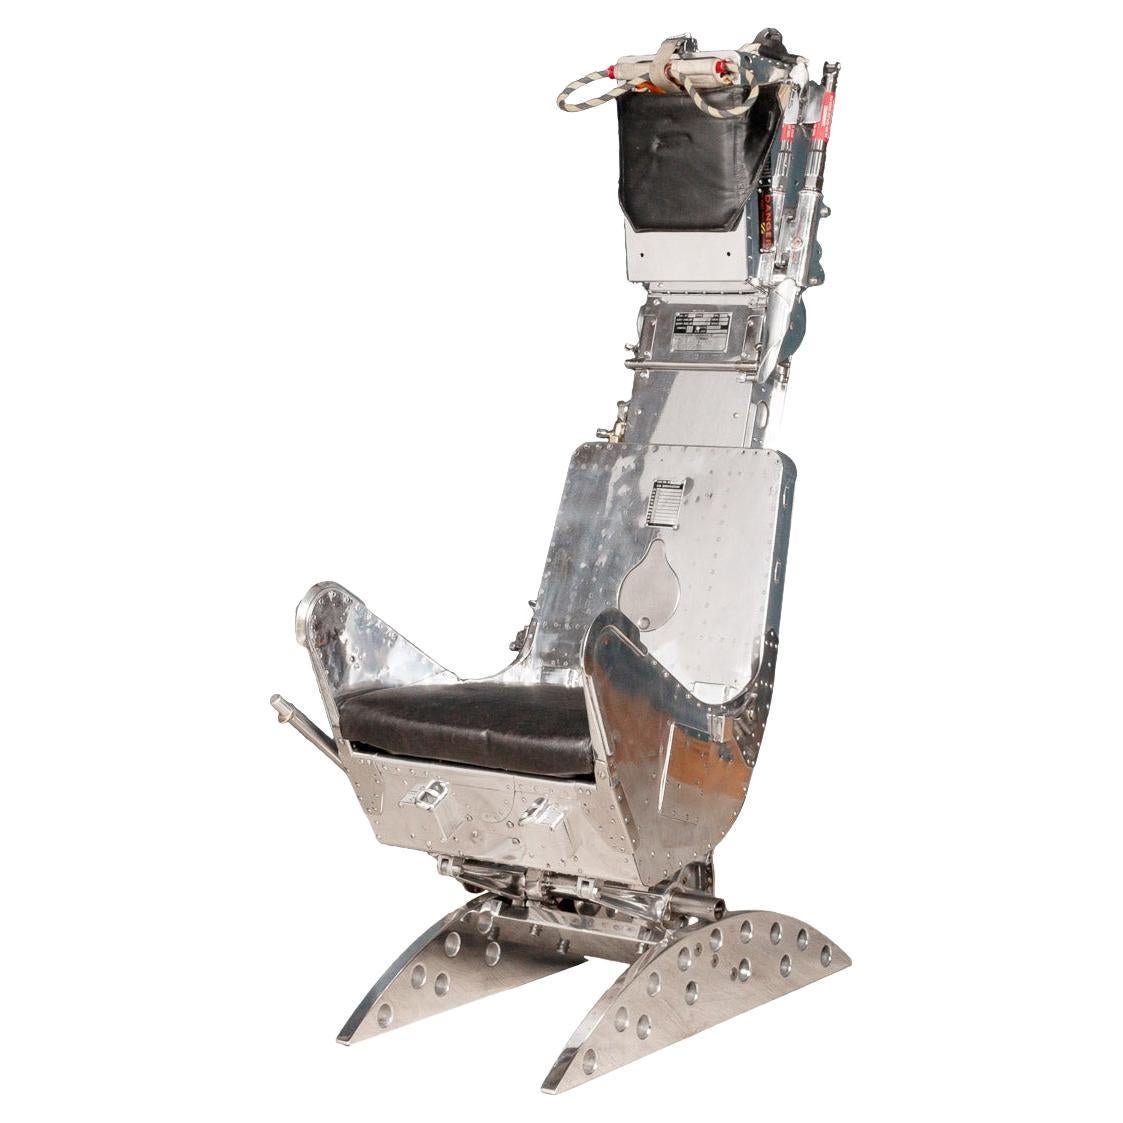 Martin Baker Mk 3 Aircraft Ejection Seat, C.1960